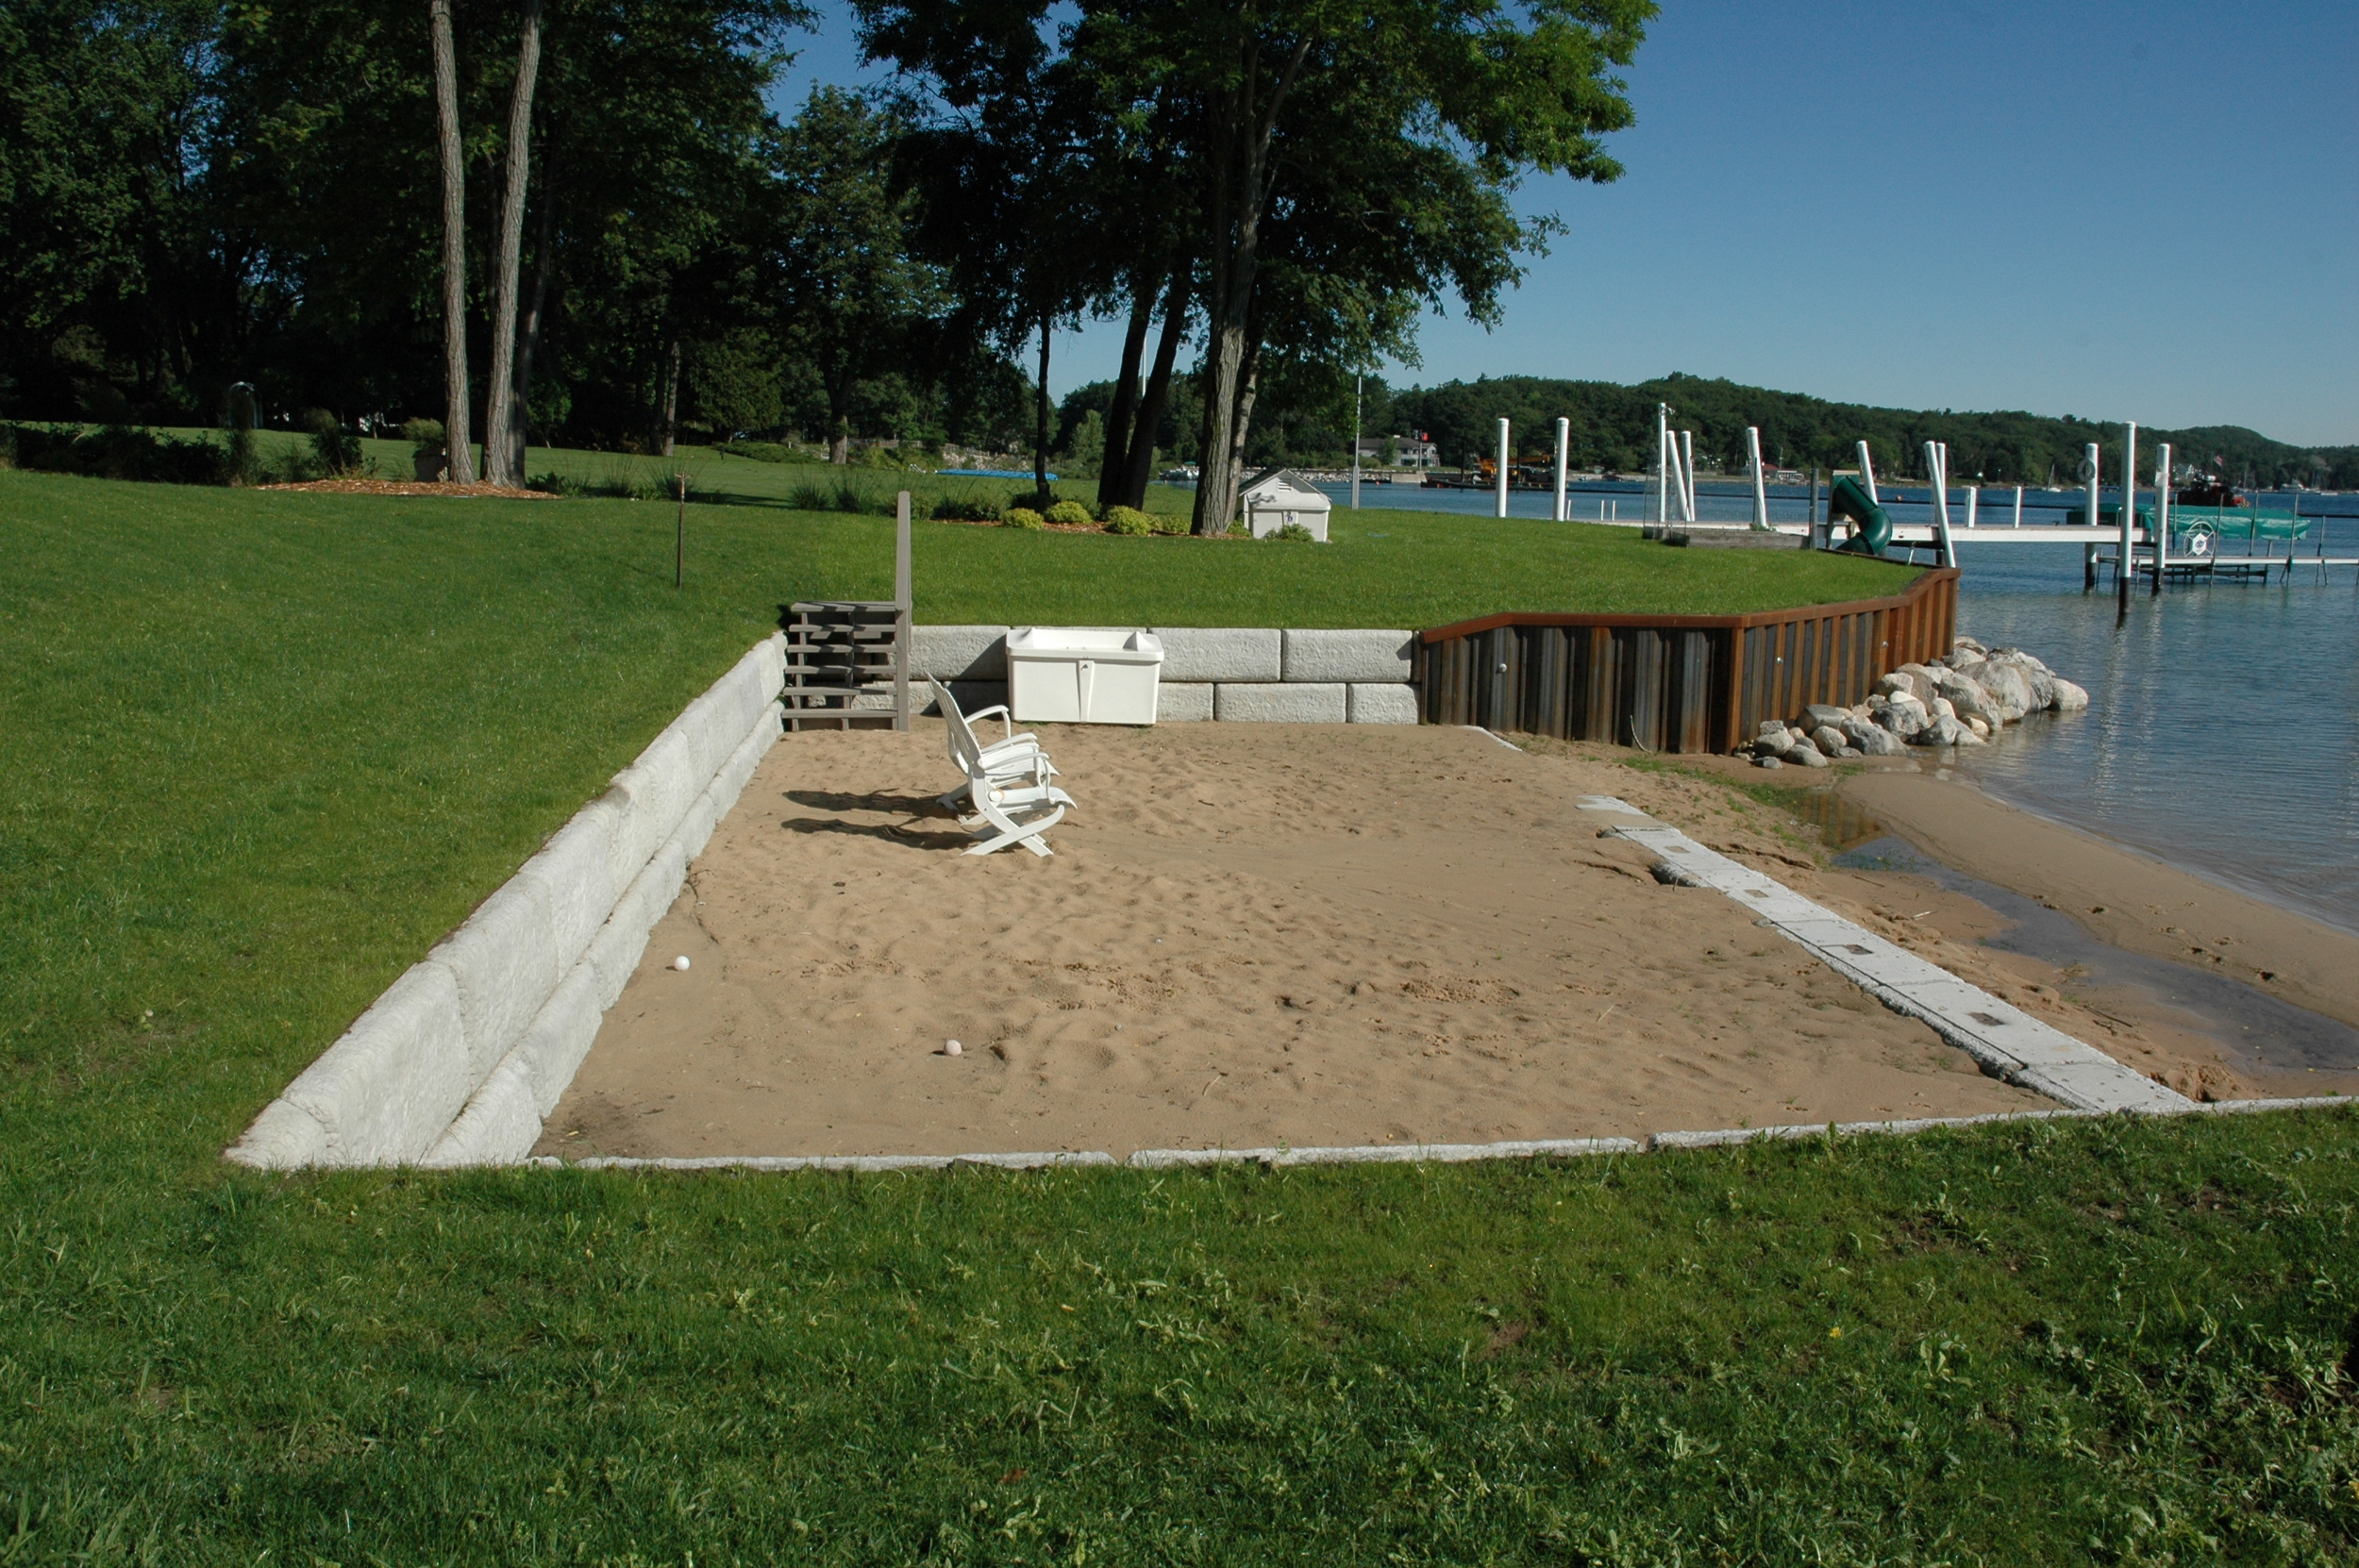   Steel Seawall/Redi-Rock Placement/Residential Beach Area, photo 3  